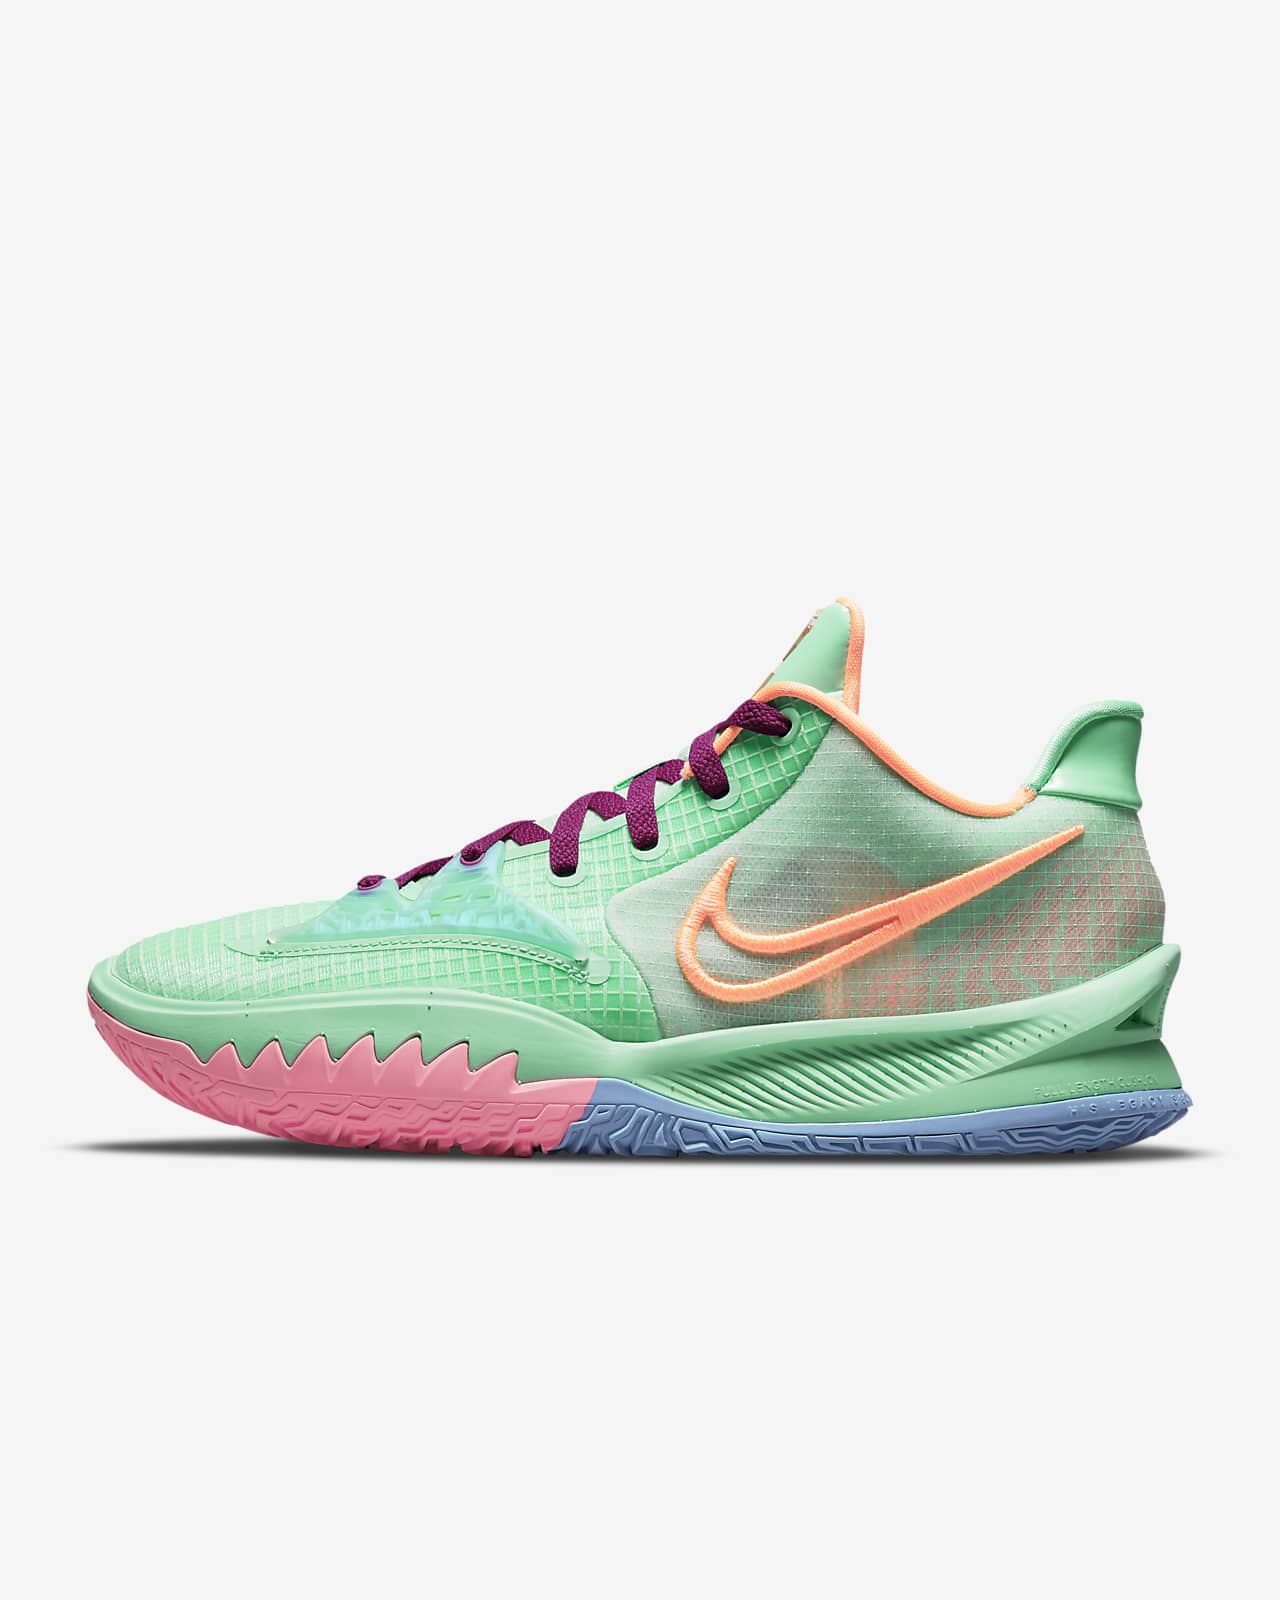 nike mens kyrie low 4 basketball shoes